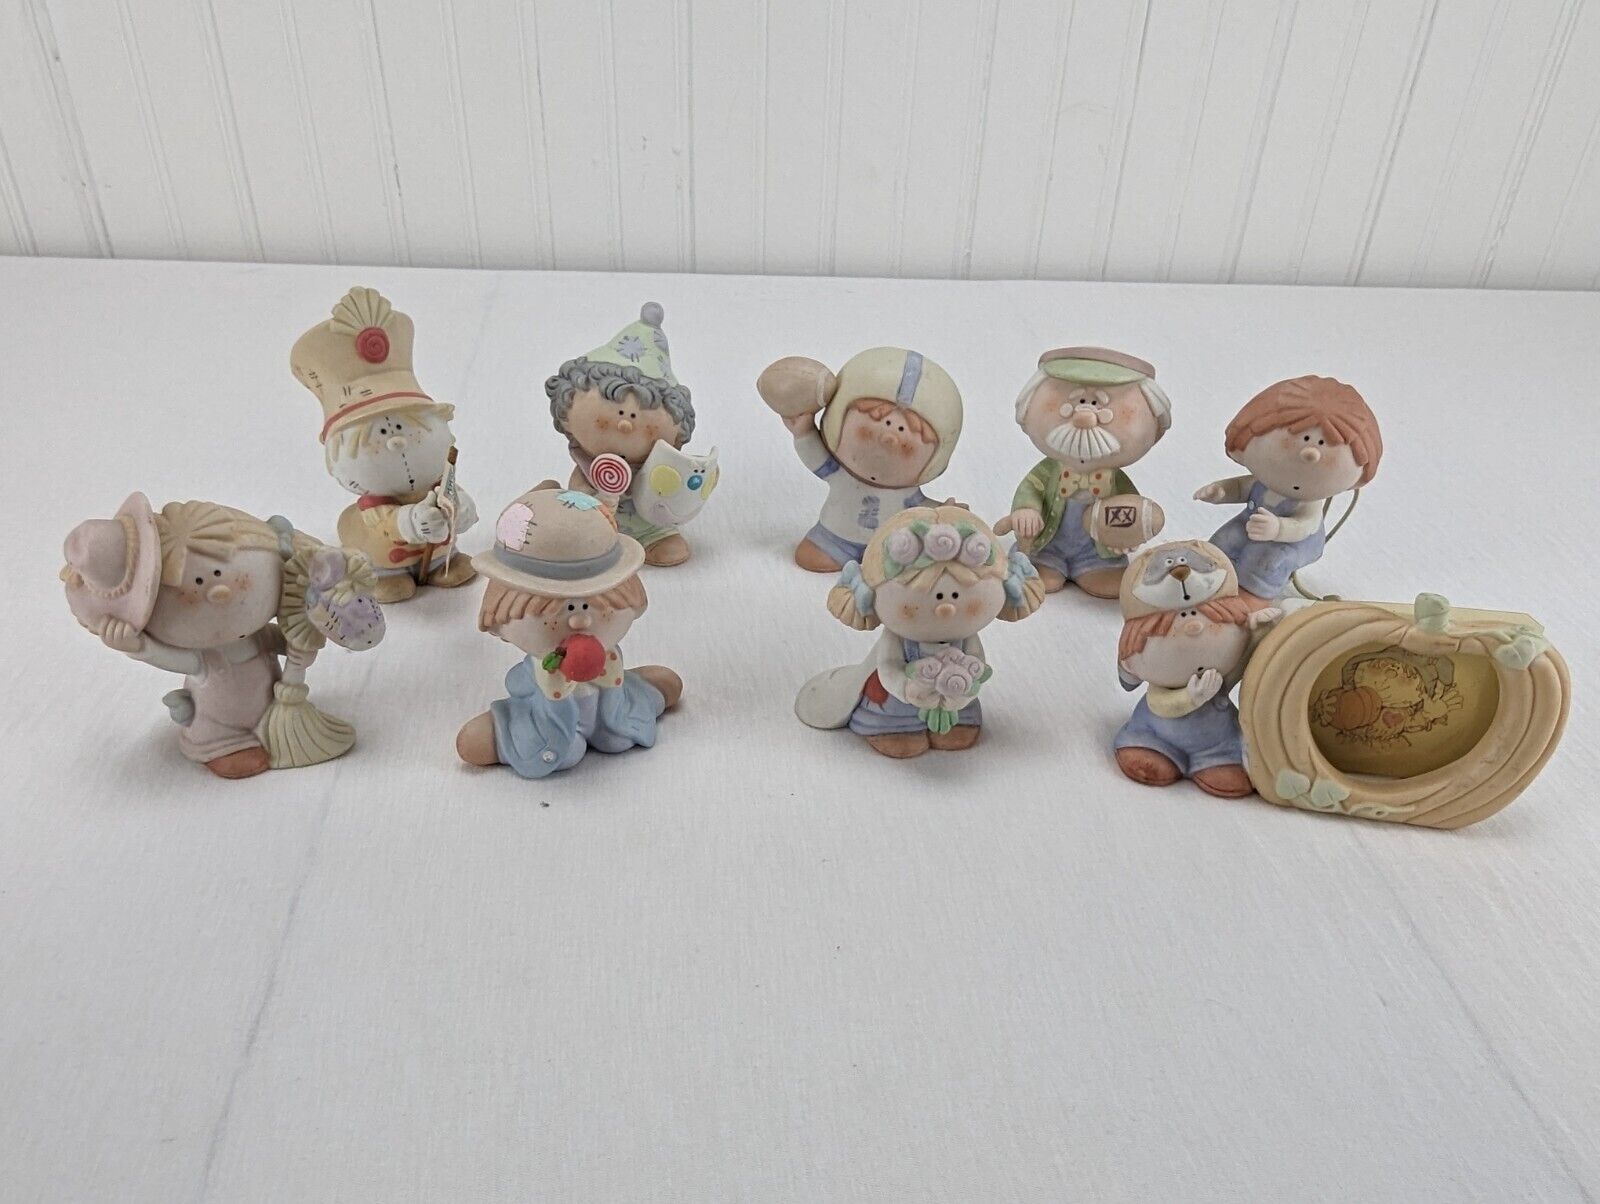 Vintage Bumpkins Ceramic Figurines Mixed Lot of 9 by Fabrizio for George